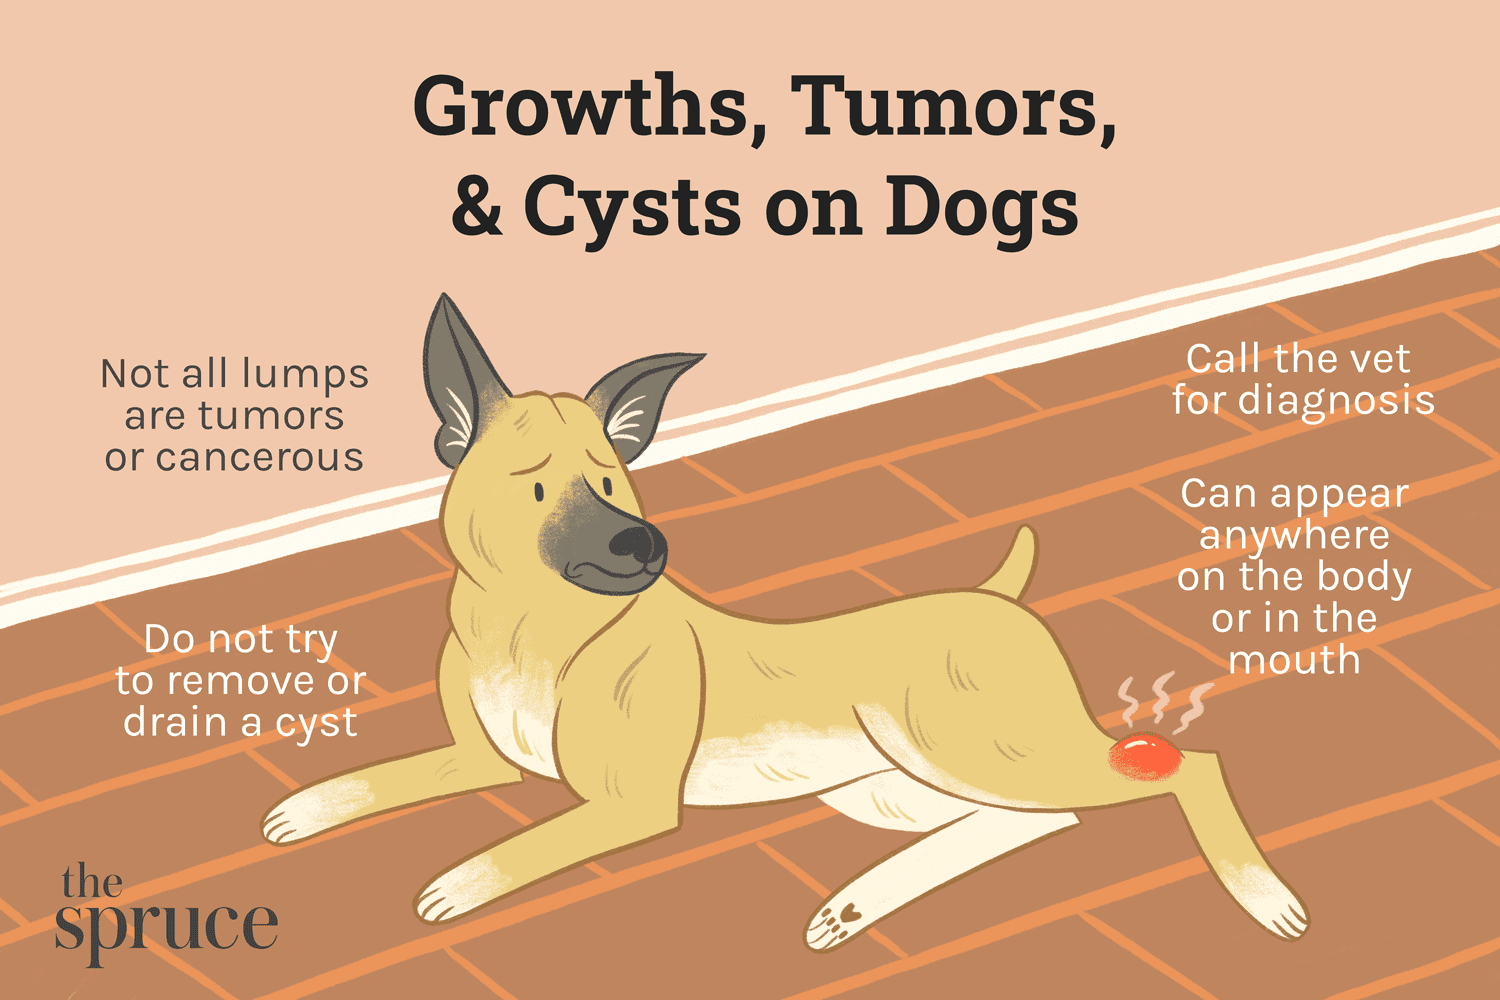 mast cell disorders , treatment options for MCTs in dogs , mast cell tumors in dogs mast cell tumor , pictures of mast cell tumors in dogs , mast cell tumor pictures treating mast cell tumors in dogs